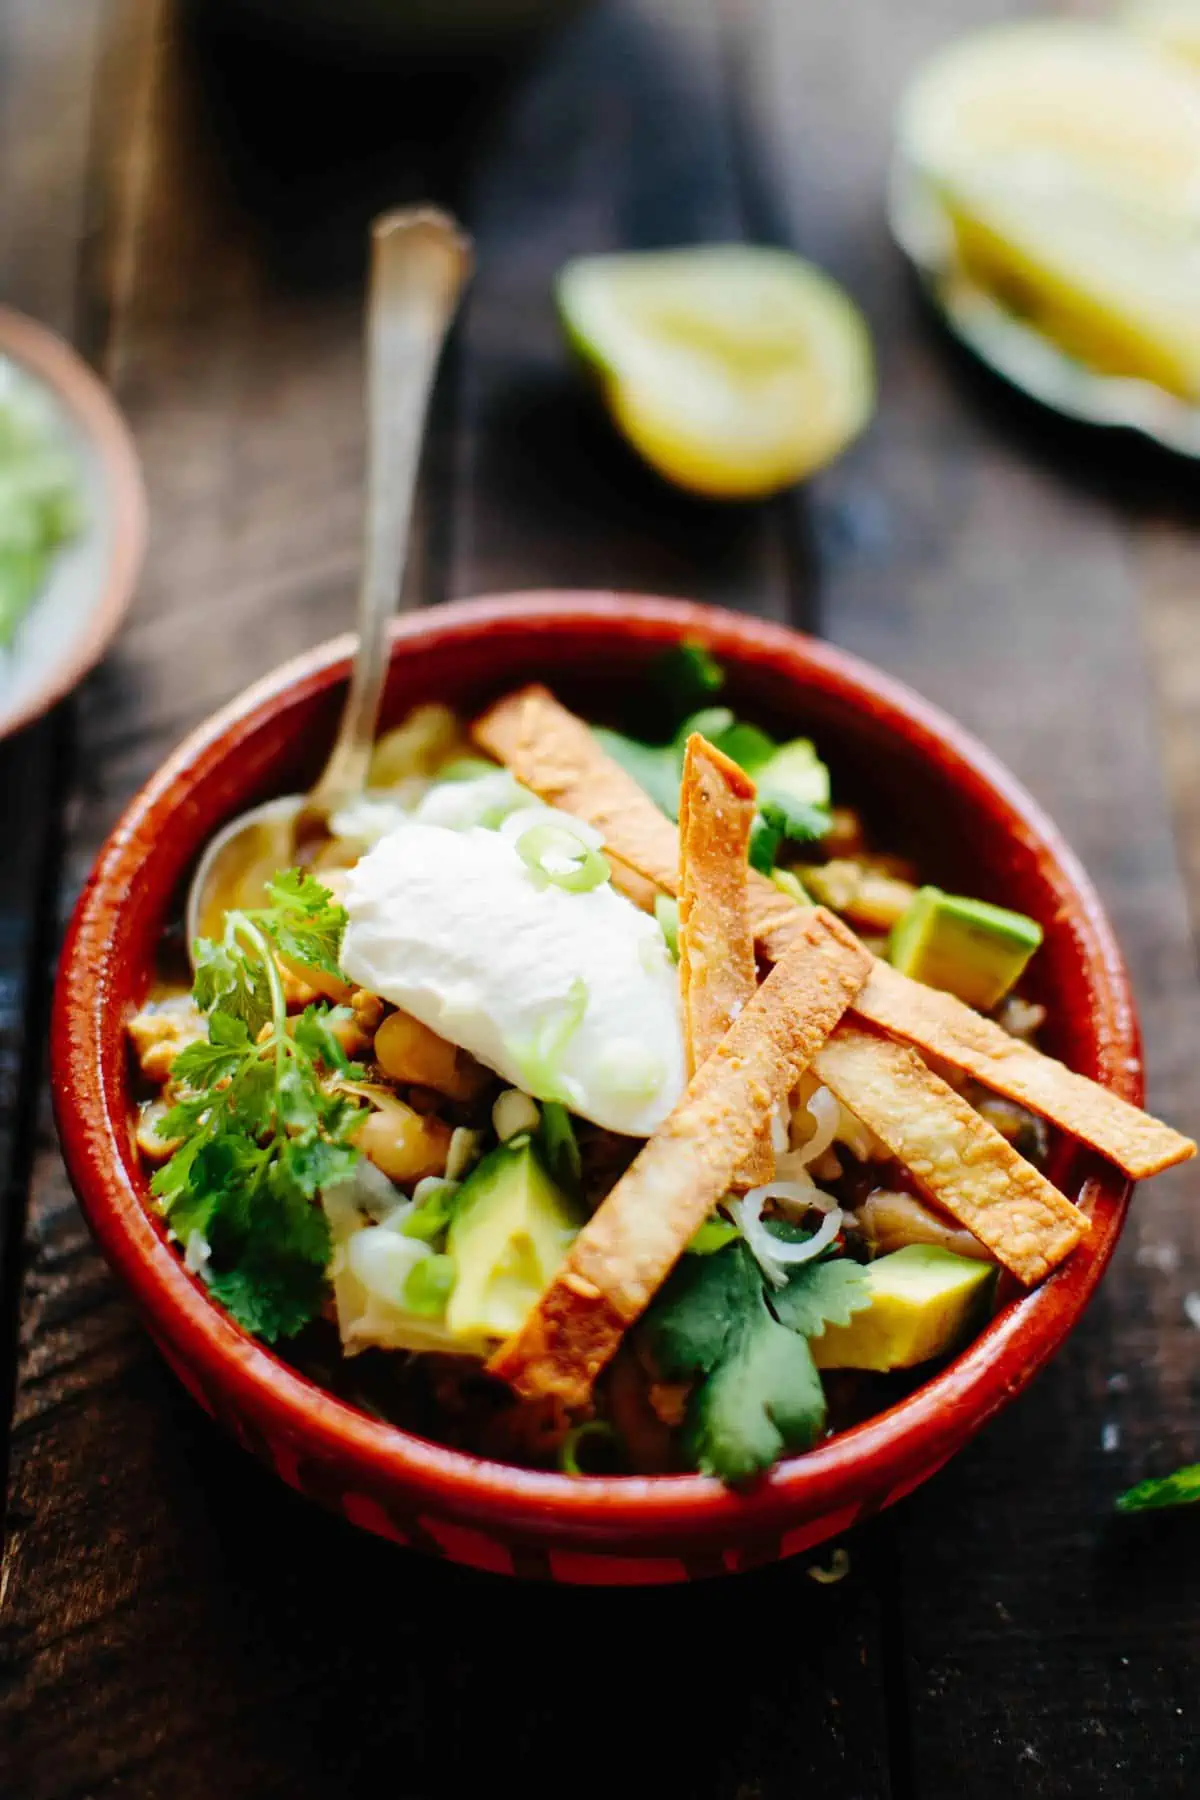 Close up of all the toppings on white bean chicken chili - cilantro, avocado, sour cream, and fried tortilla strips.